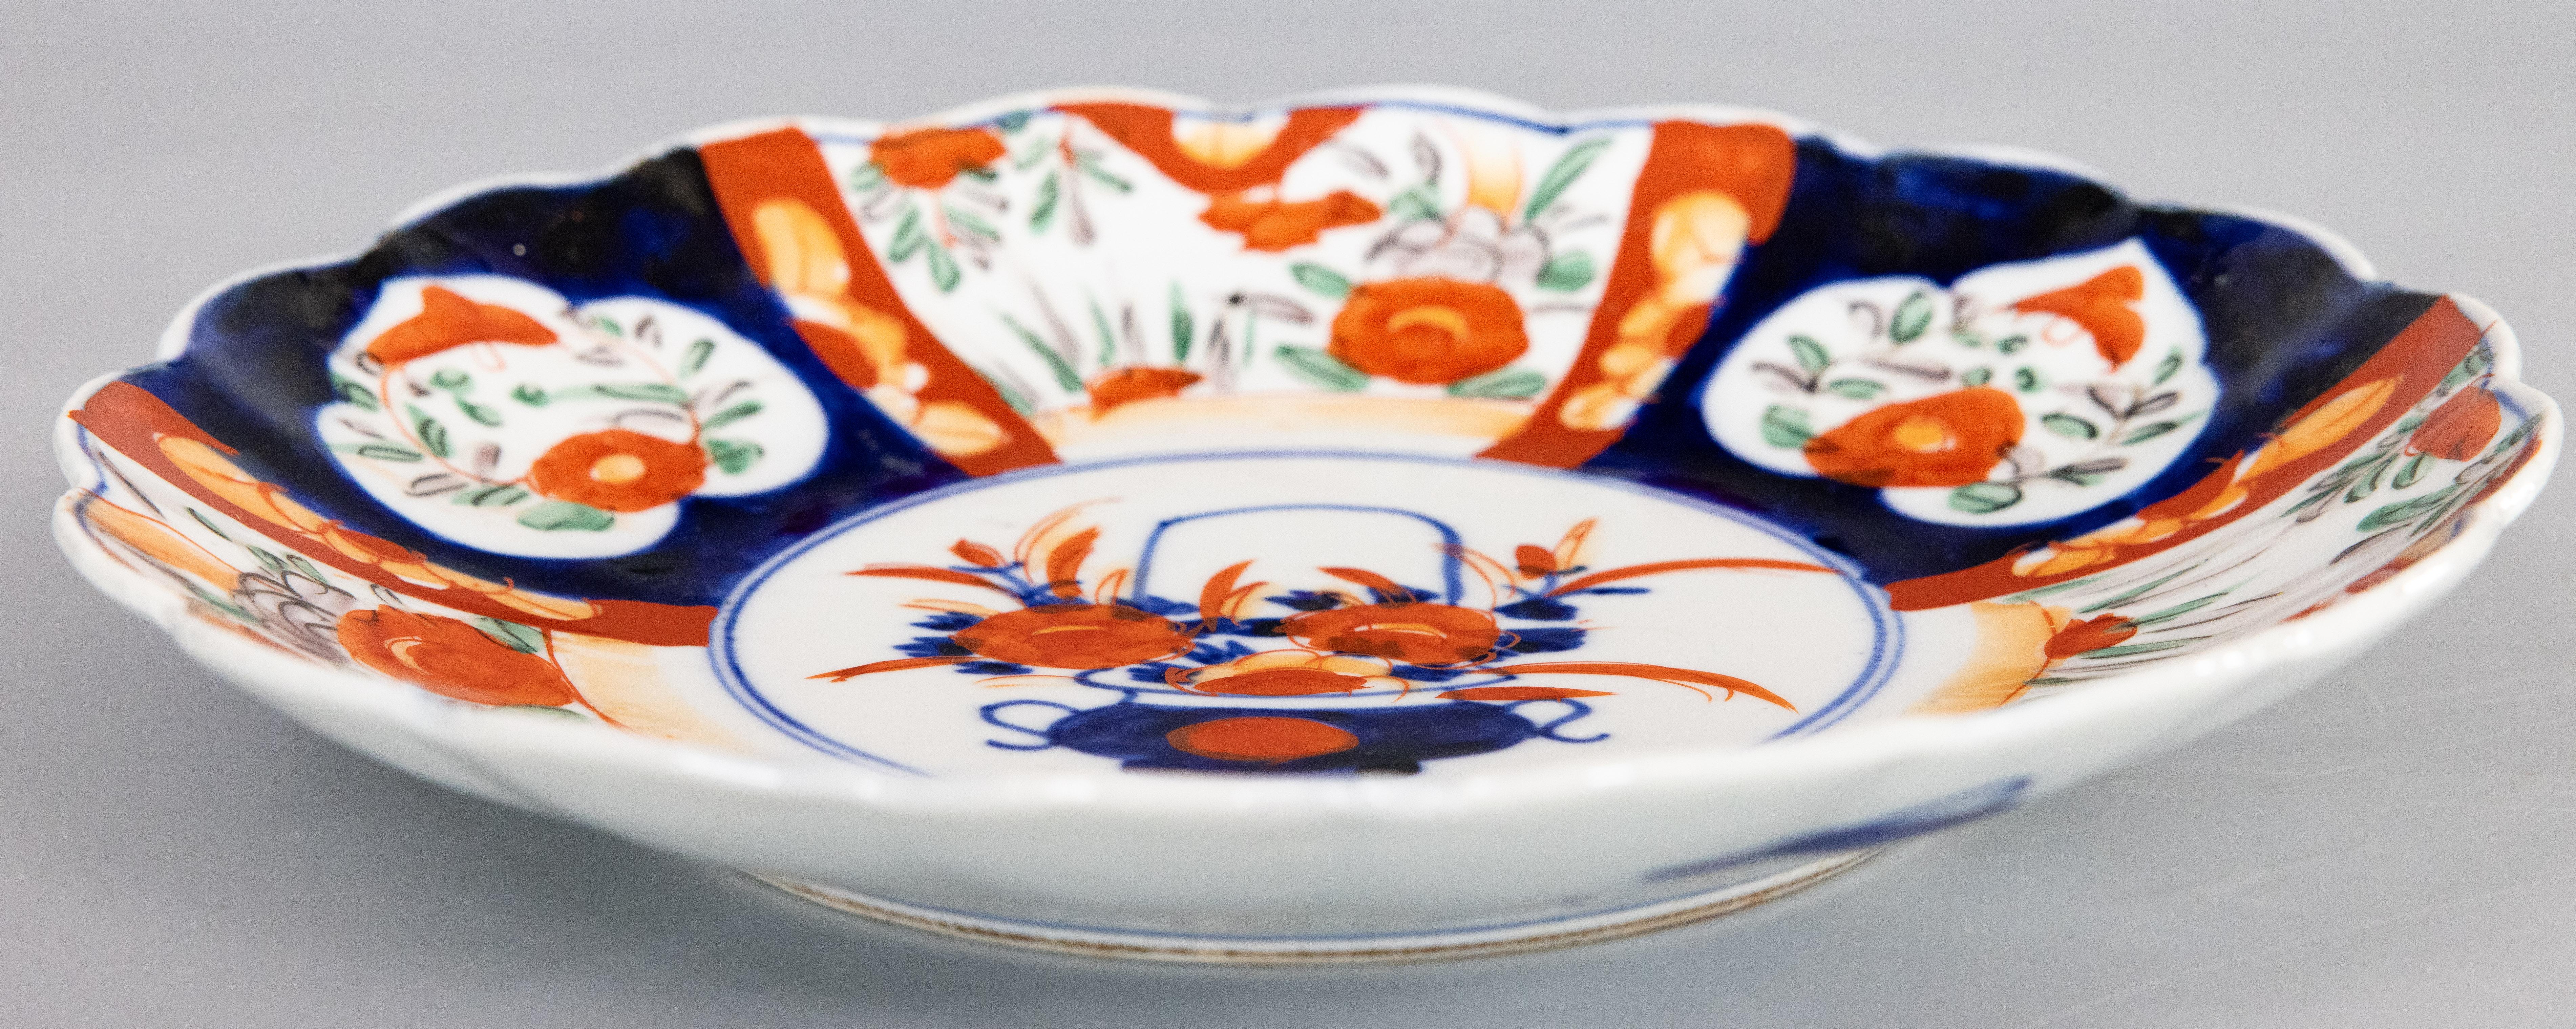 Hand-Painted 19th Century Japanese Meiji Period Imari Scalloped Charger Plate For Sale